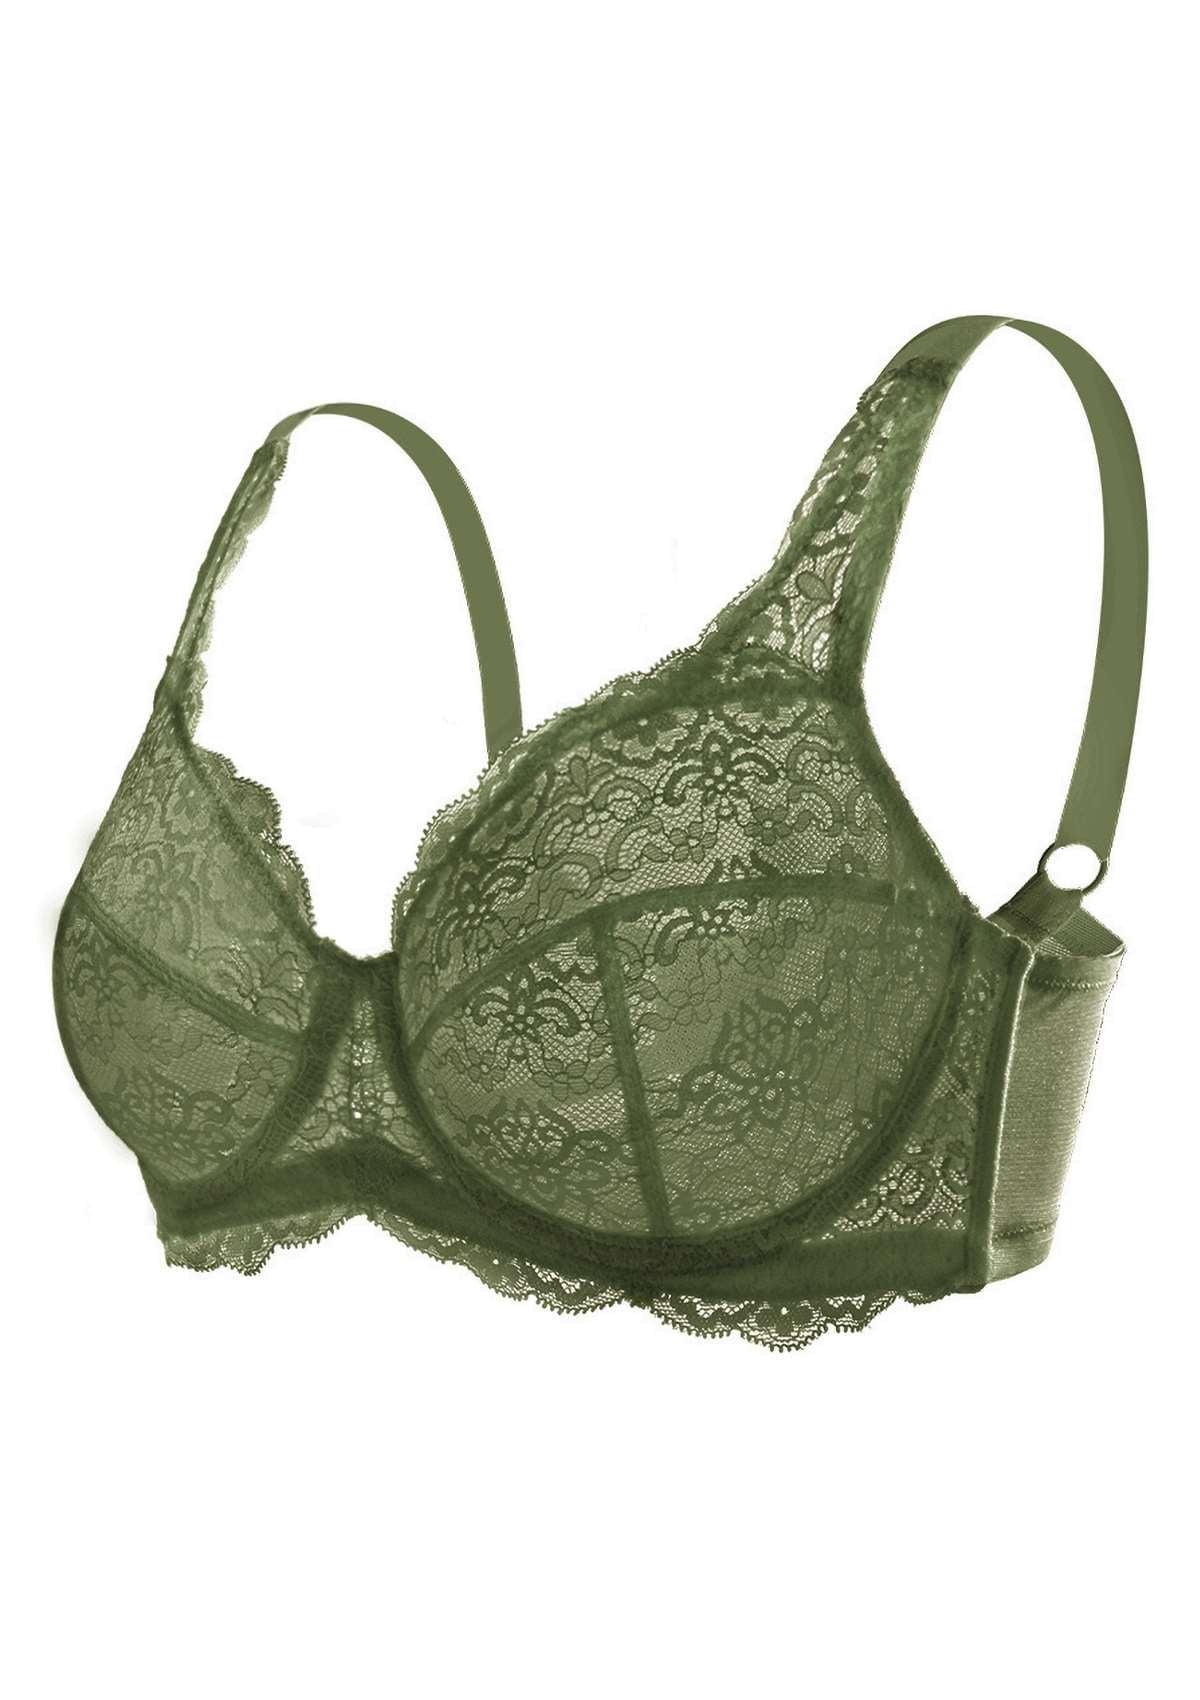 HSIA All-Over Floral Lace Unlined Bra: Minimizer Bra For Heavy Breasts - Dark Green / 40 / DDD/F